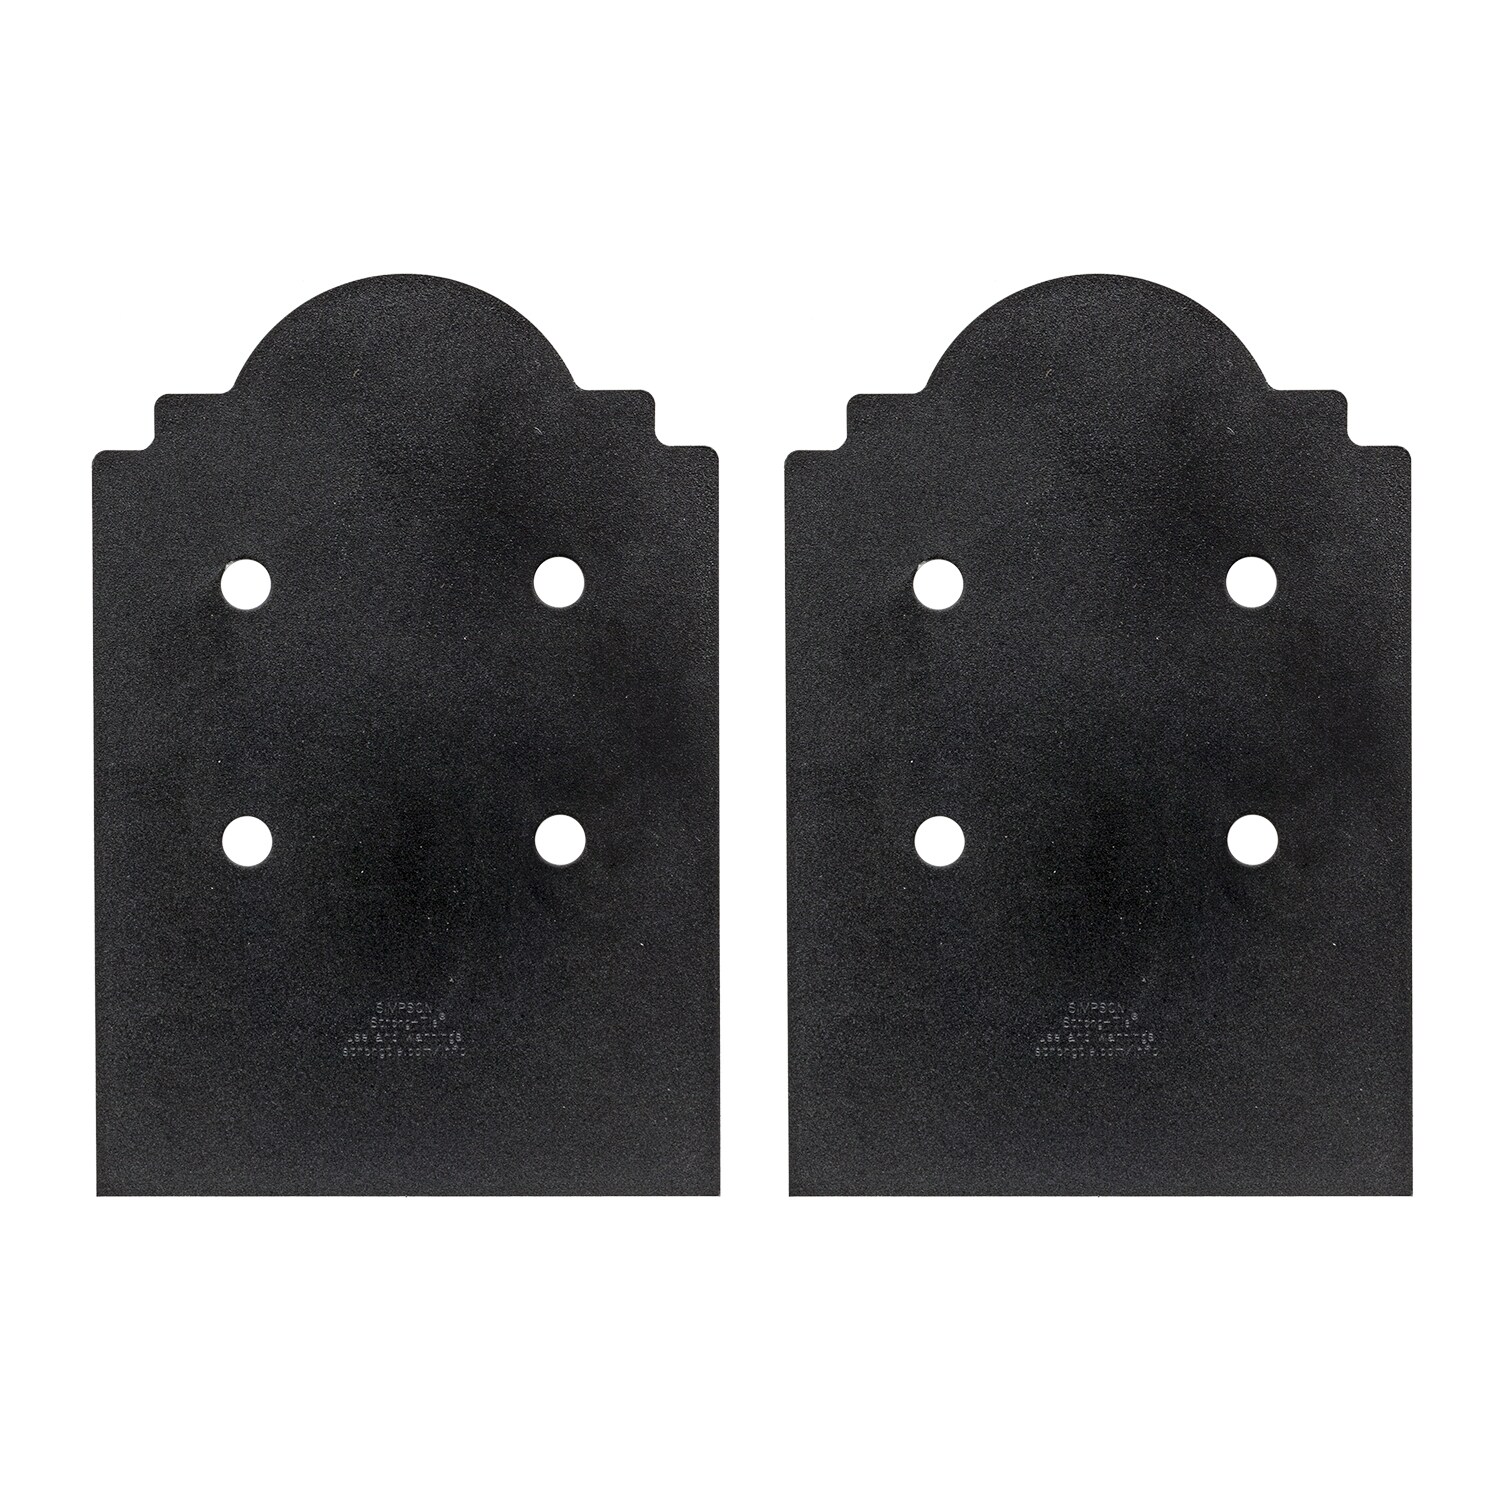 Simpson Strong-Tie Outdoor Accents Black Powder-Coated Post Base for 8x8 Lumber 